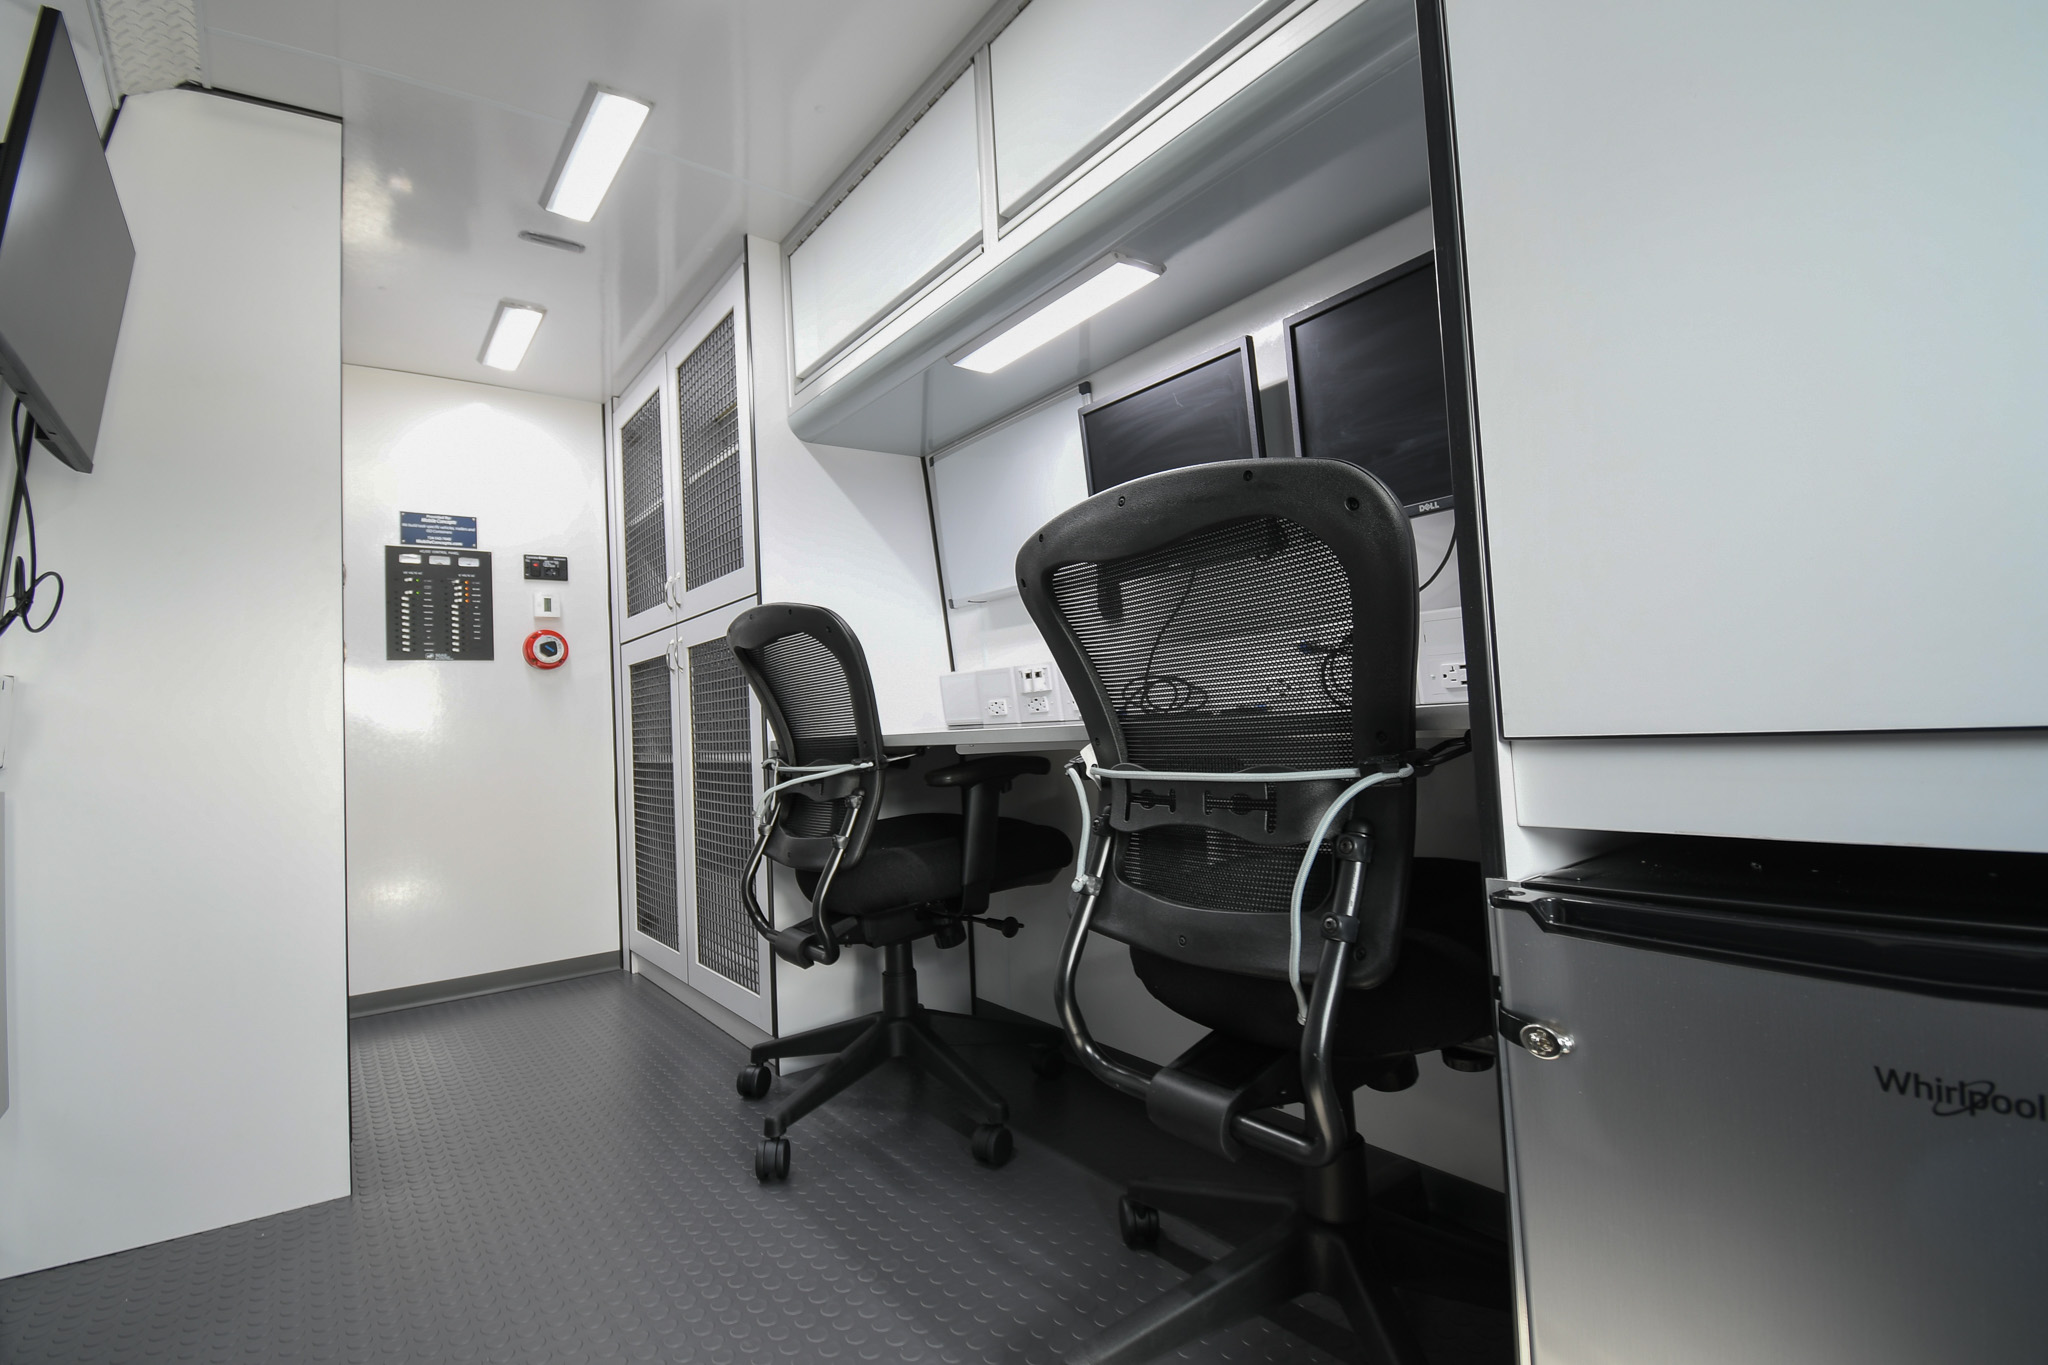 An interior view of the unit for Johnstown, PA.